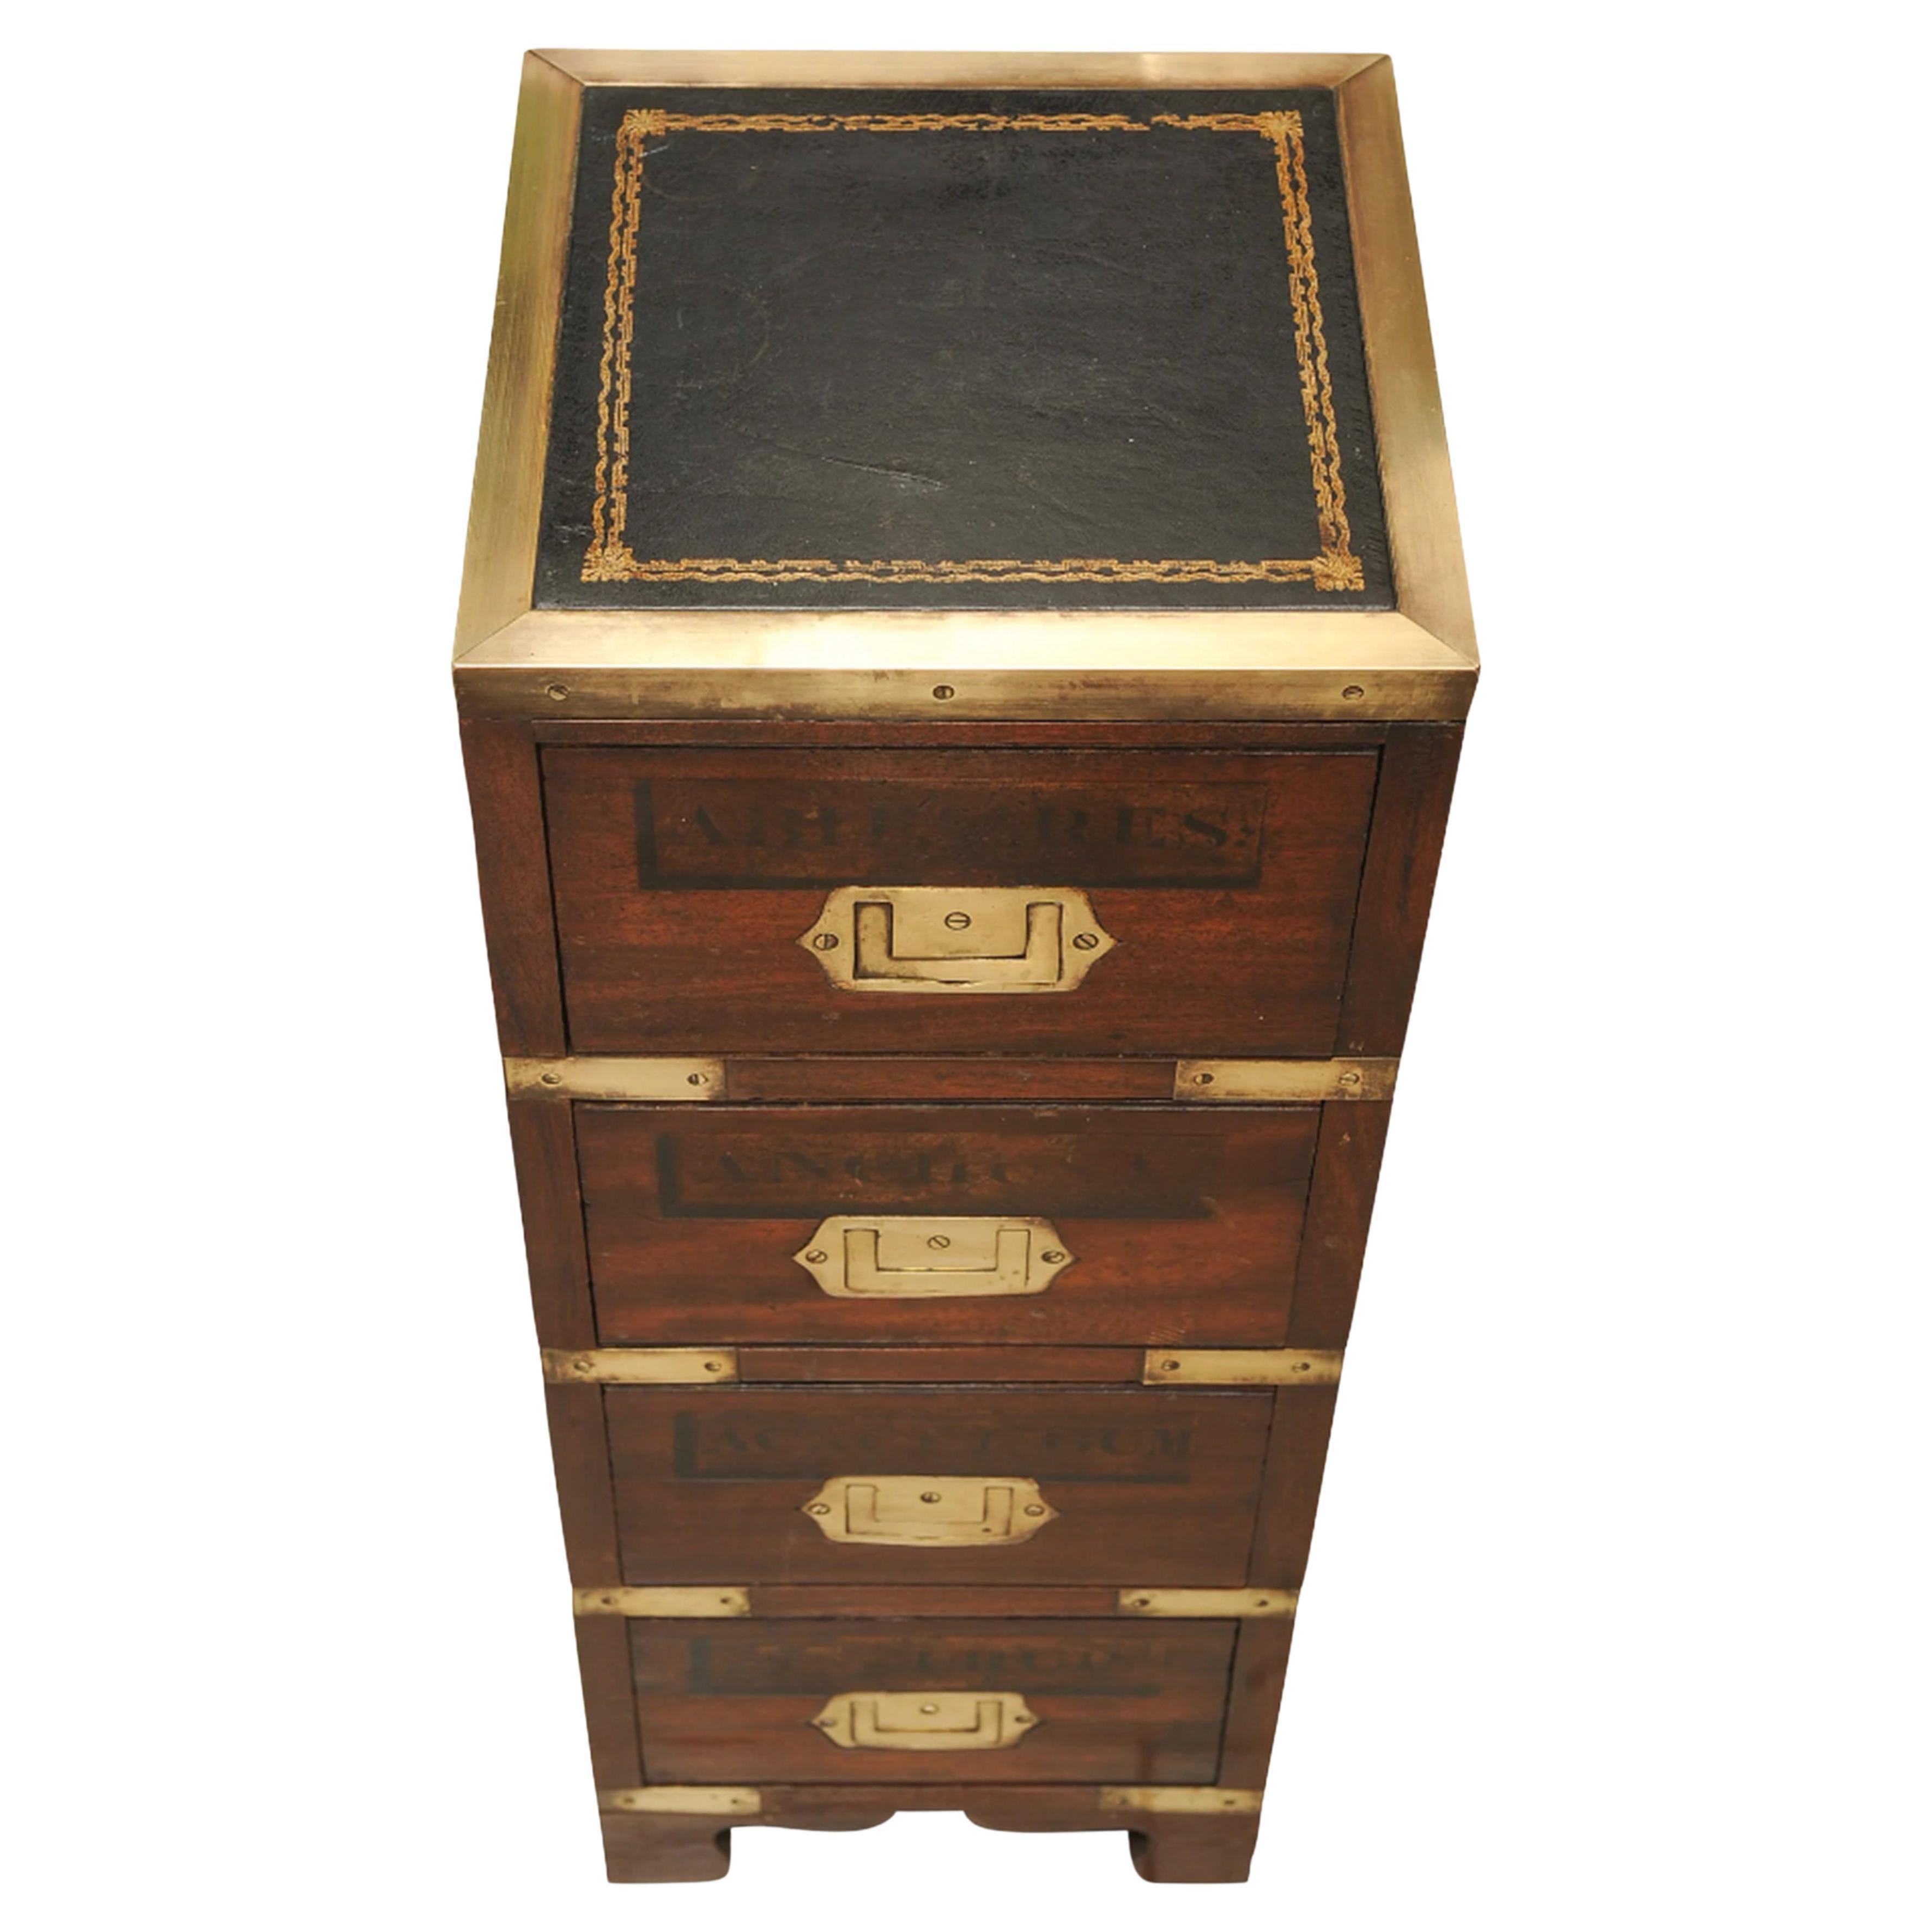 Rare Victorian Apothecary Military Campaign four drawer brass bound chest finished with tooled black leather

A Beautiful handcrafted Apothecary Chest. Each drawer has been indented and hand painted with its own medicine title for easy access.